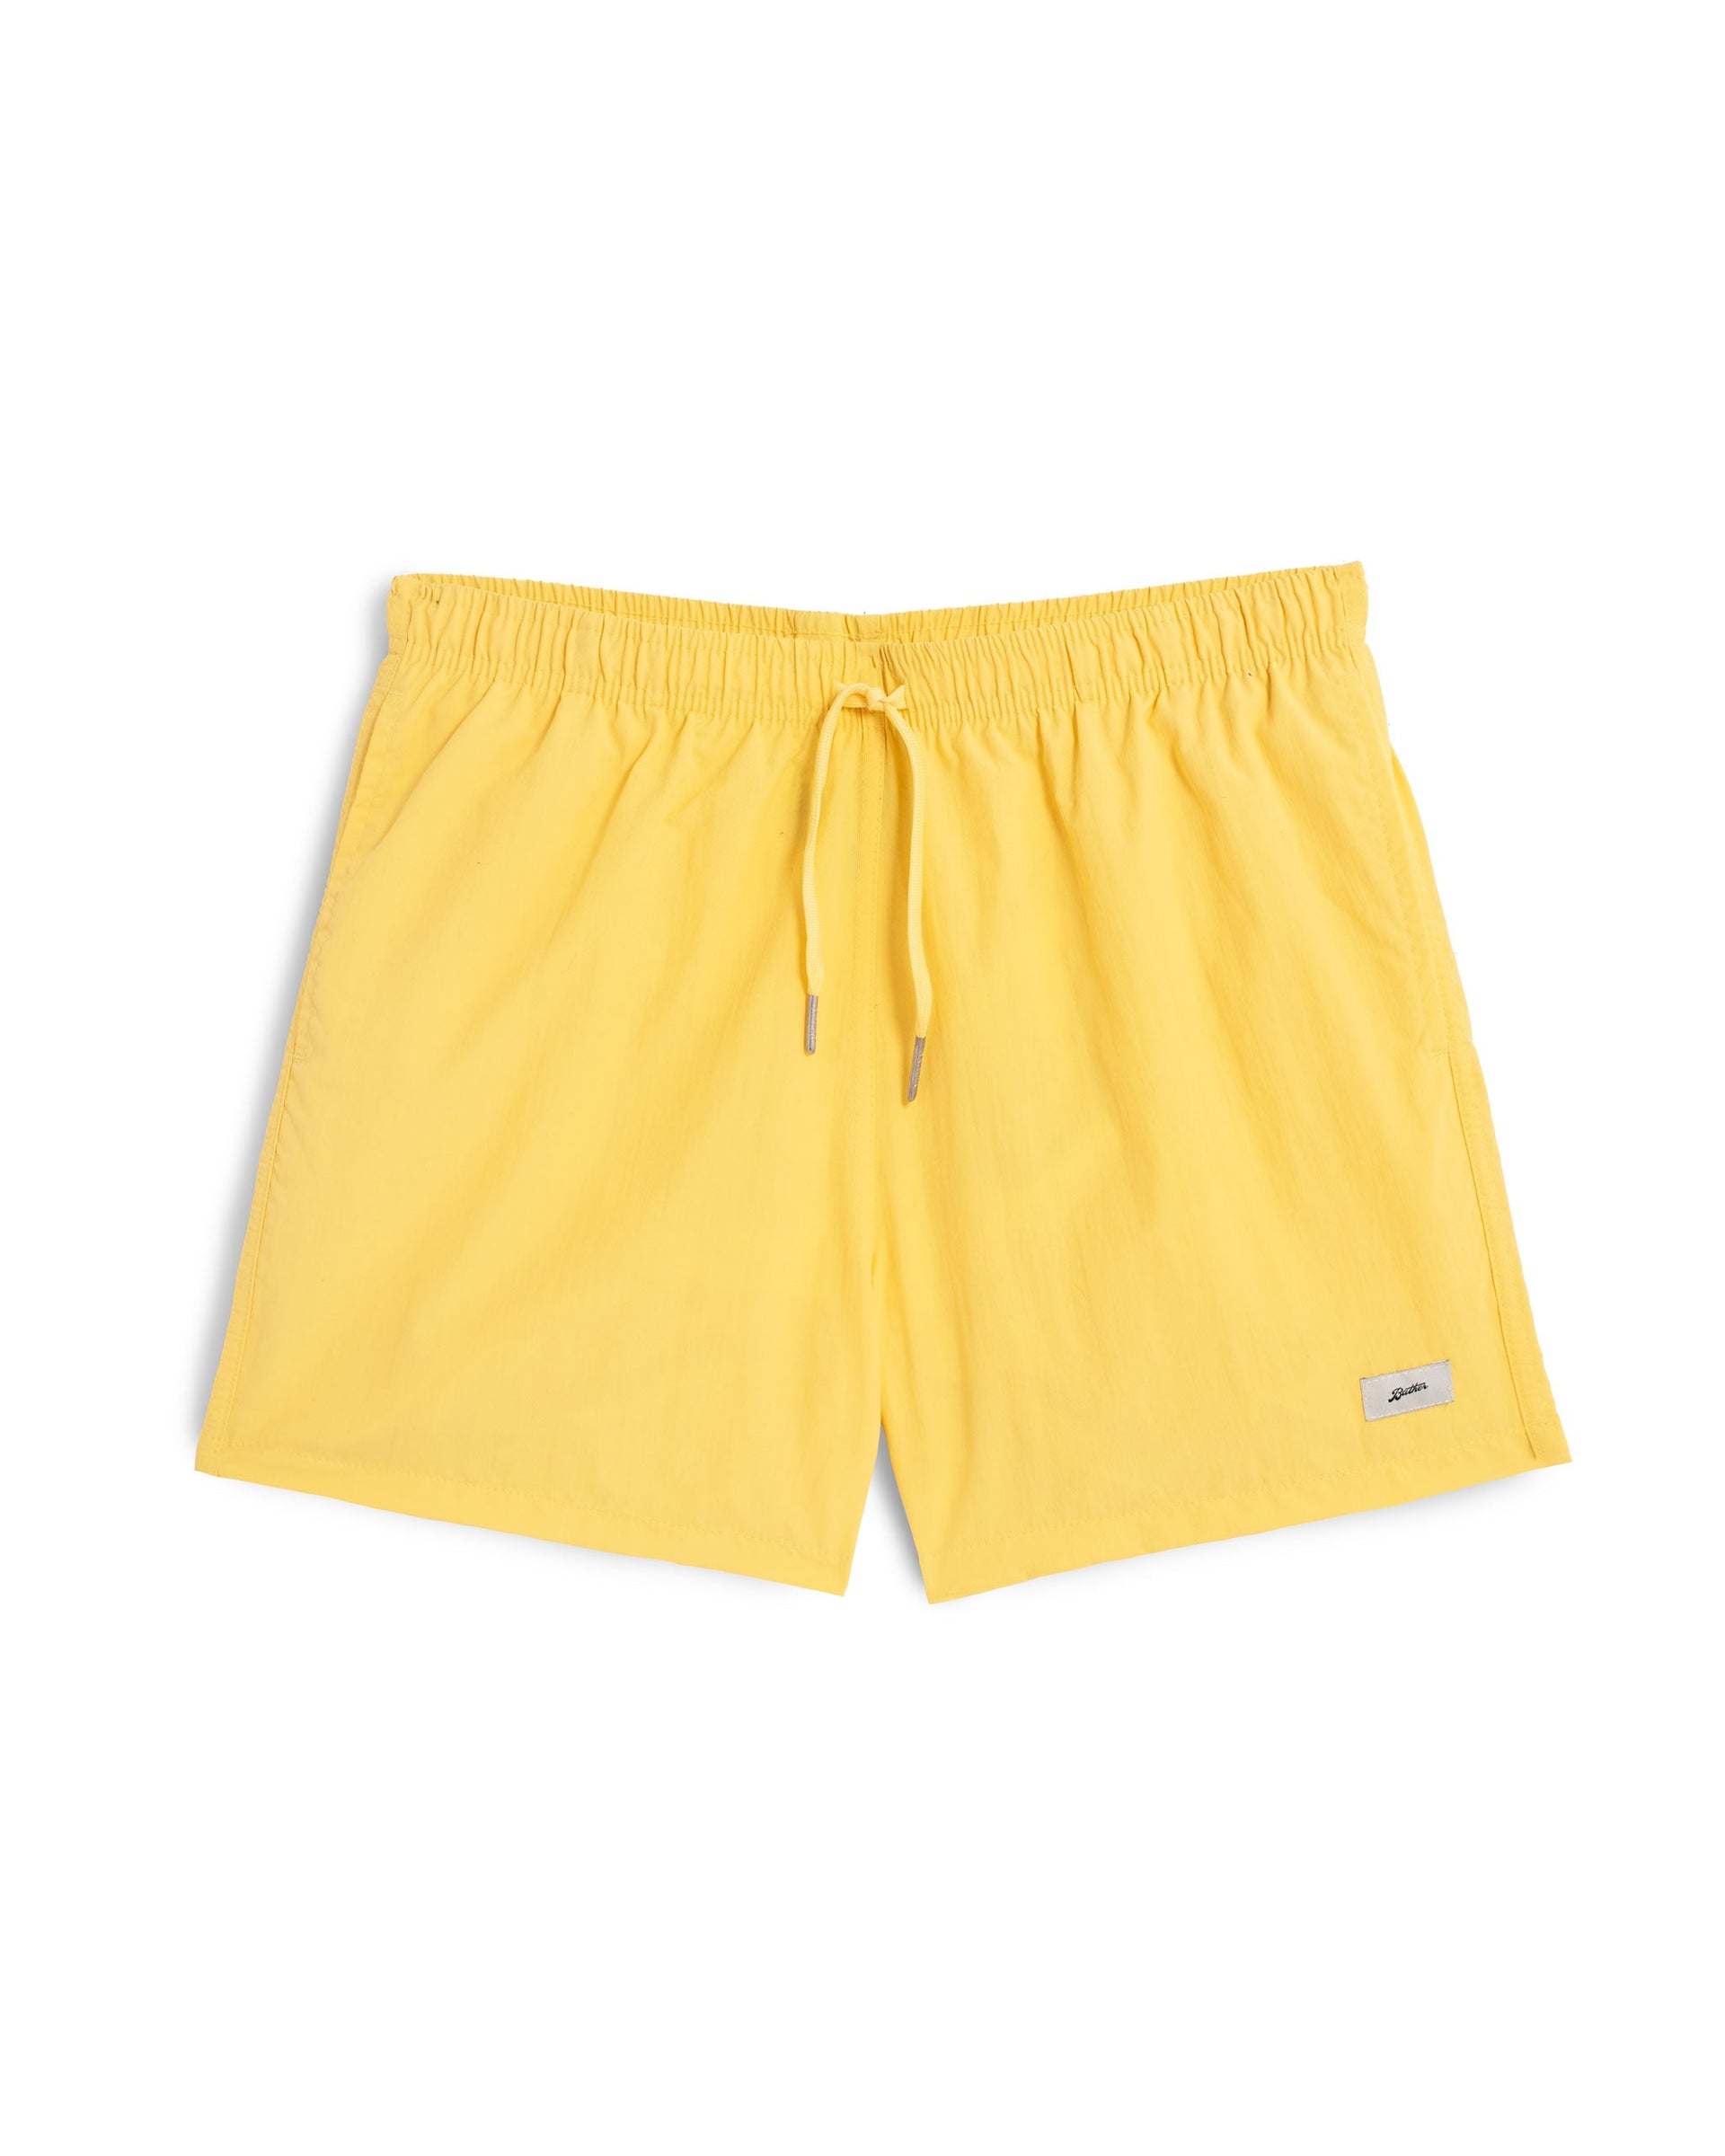 Shop All Men's Surf and Swimwear | Bather – Bather.com